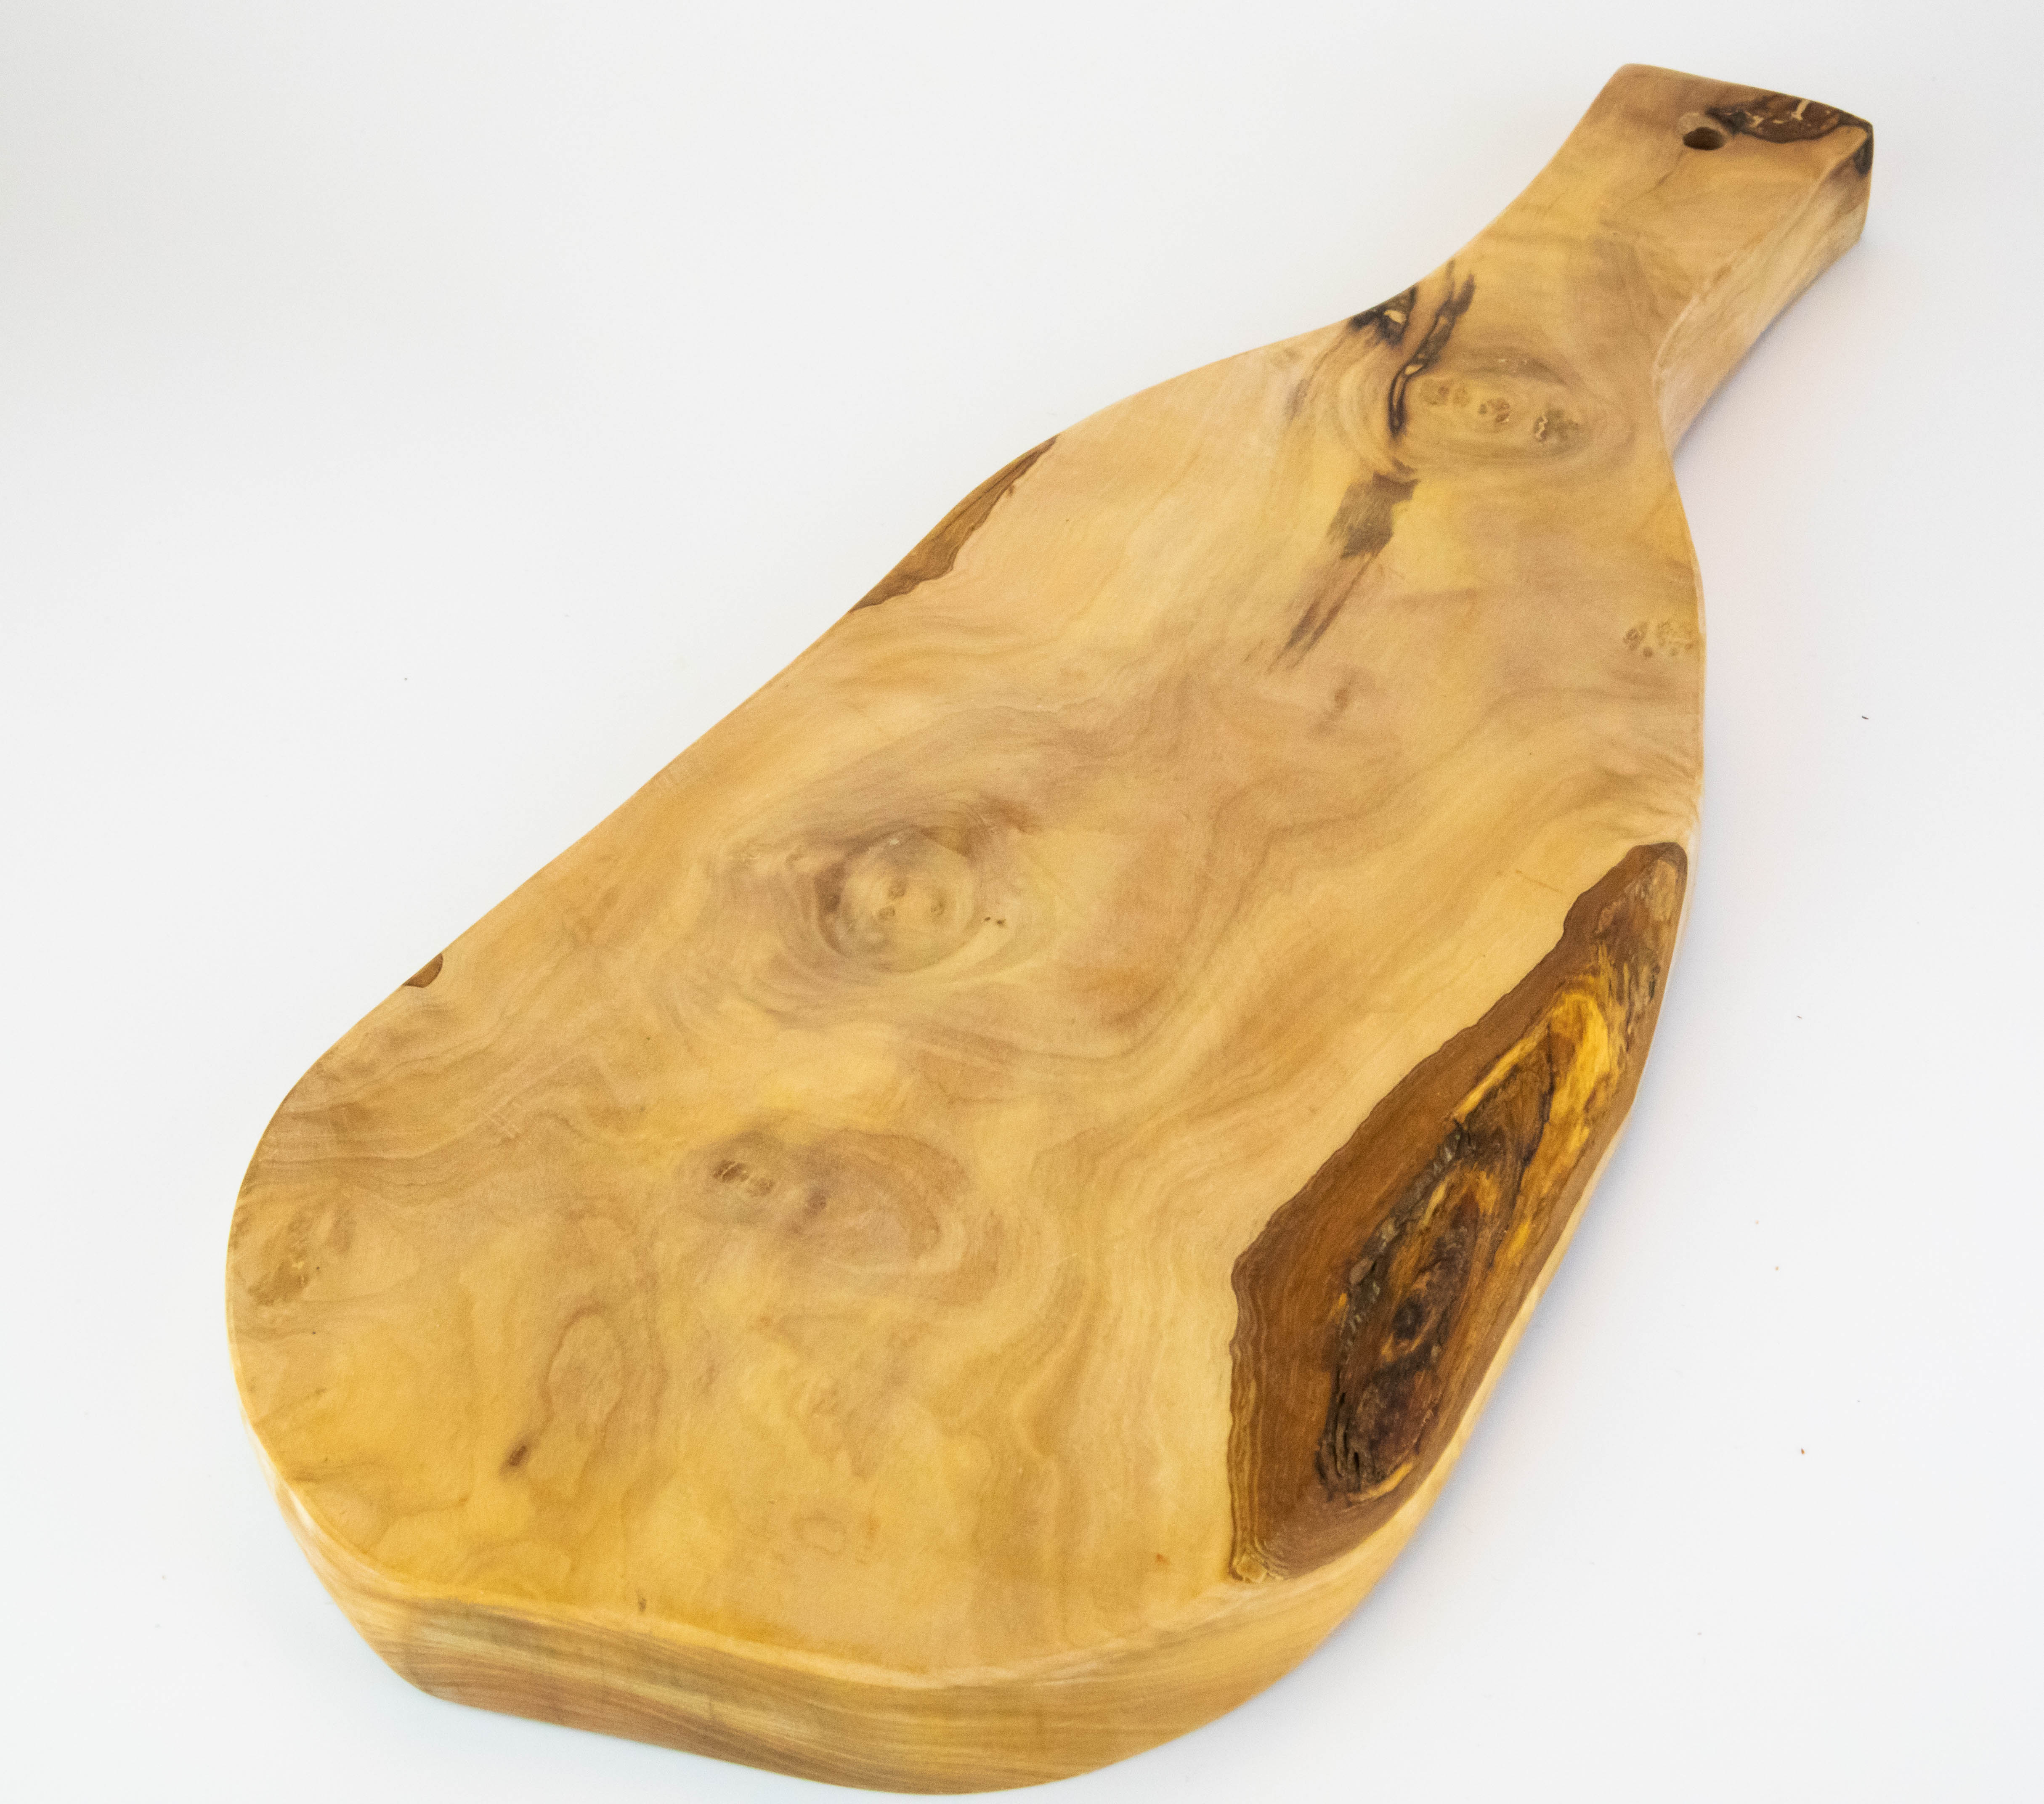 Rustic serving board with olive wood handle 40-45 cm.